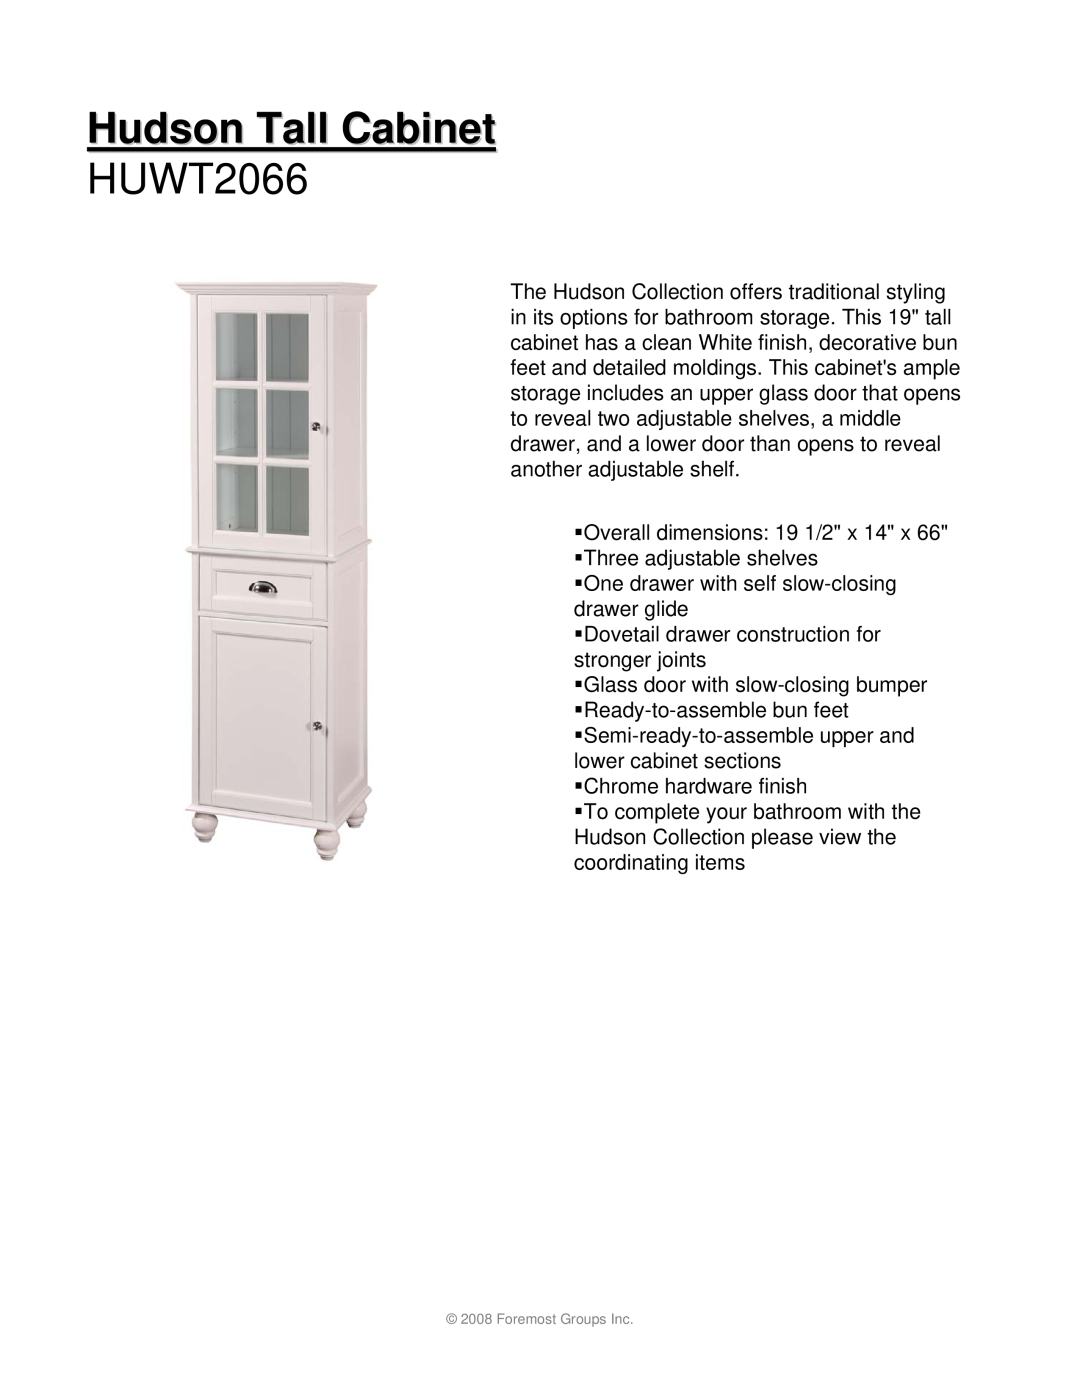 Hudson Sales & Engineering HUWF1534, HUWS2412, HUWW1828 dimensions Hudson Tall Cabinet, HUWT2066 